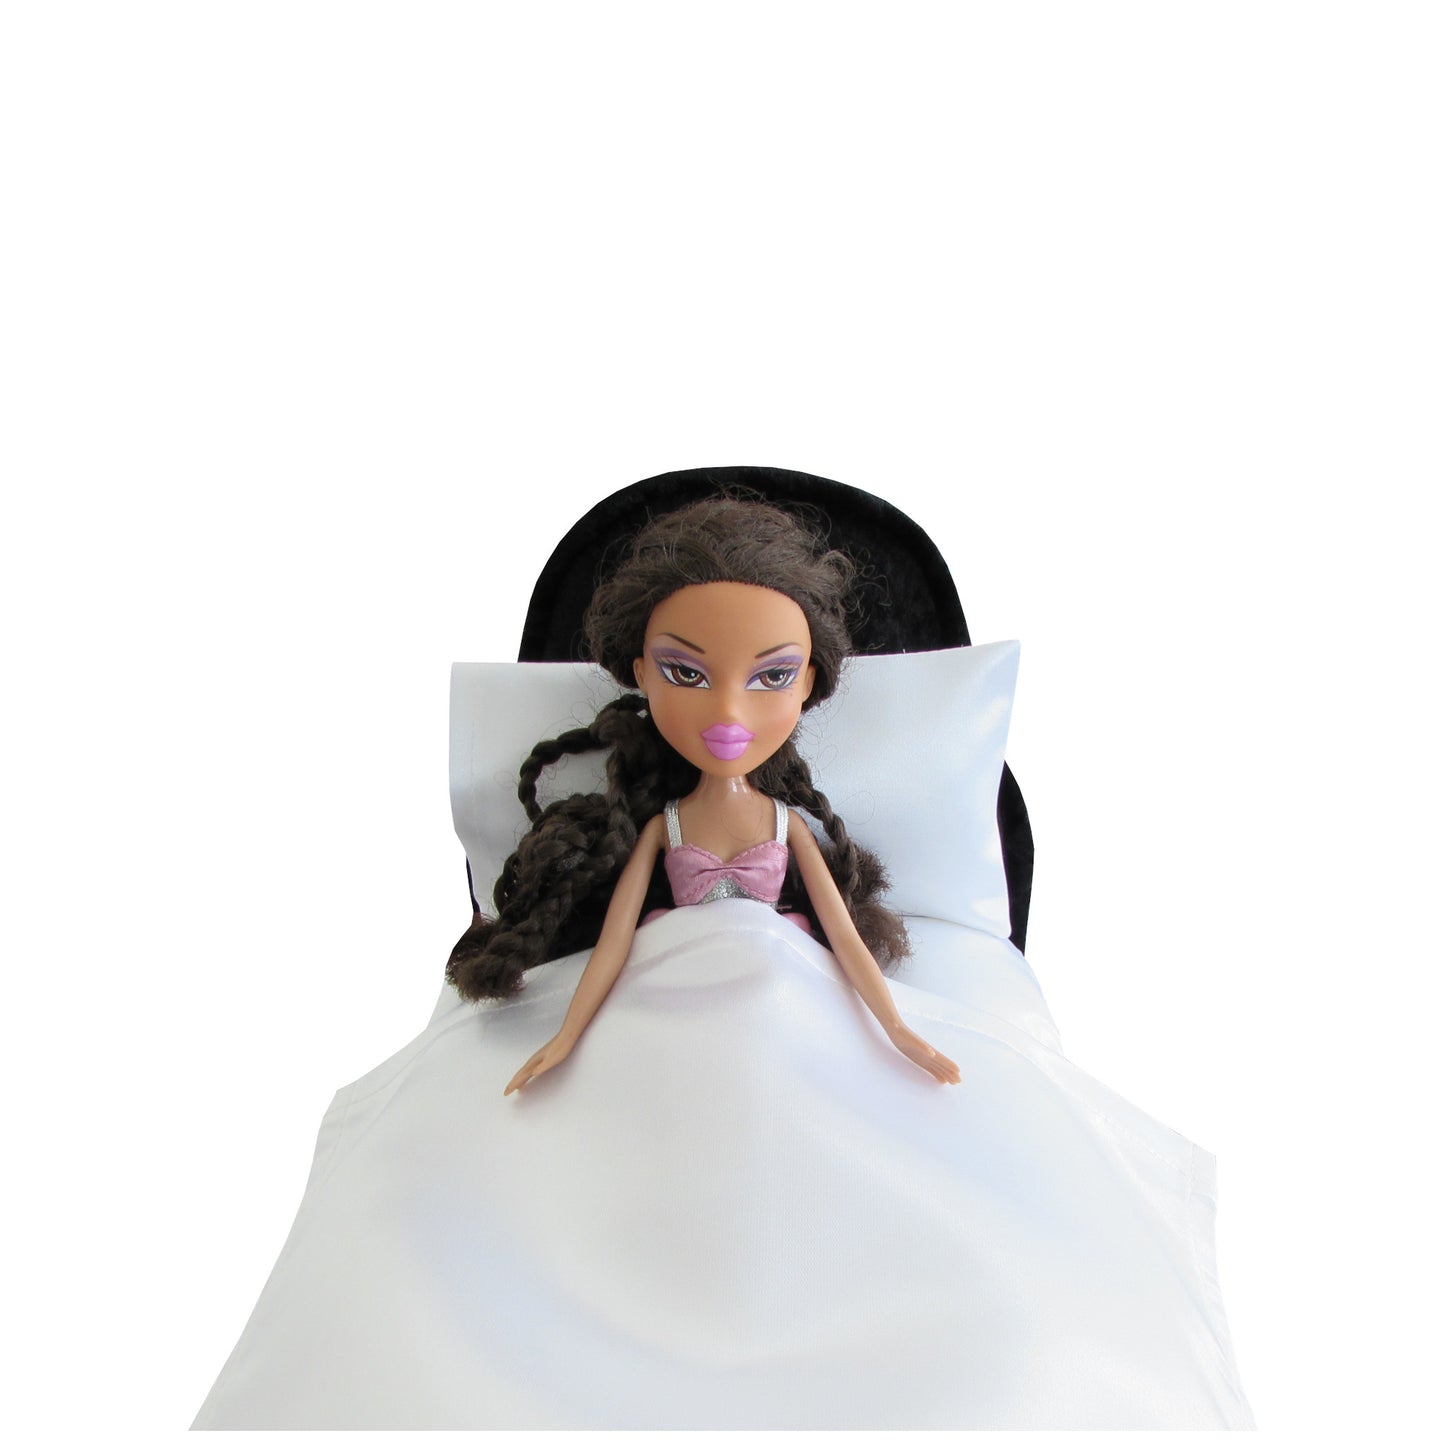 White Satin Doll Fitted Sheet, Pillow, and Black Crushed Velvet Doll Bed for 11.5-inch and 12-inch dolls with Bratz doll